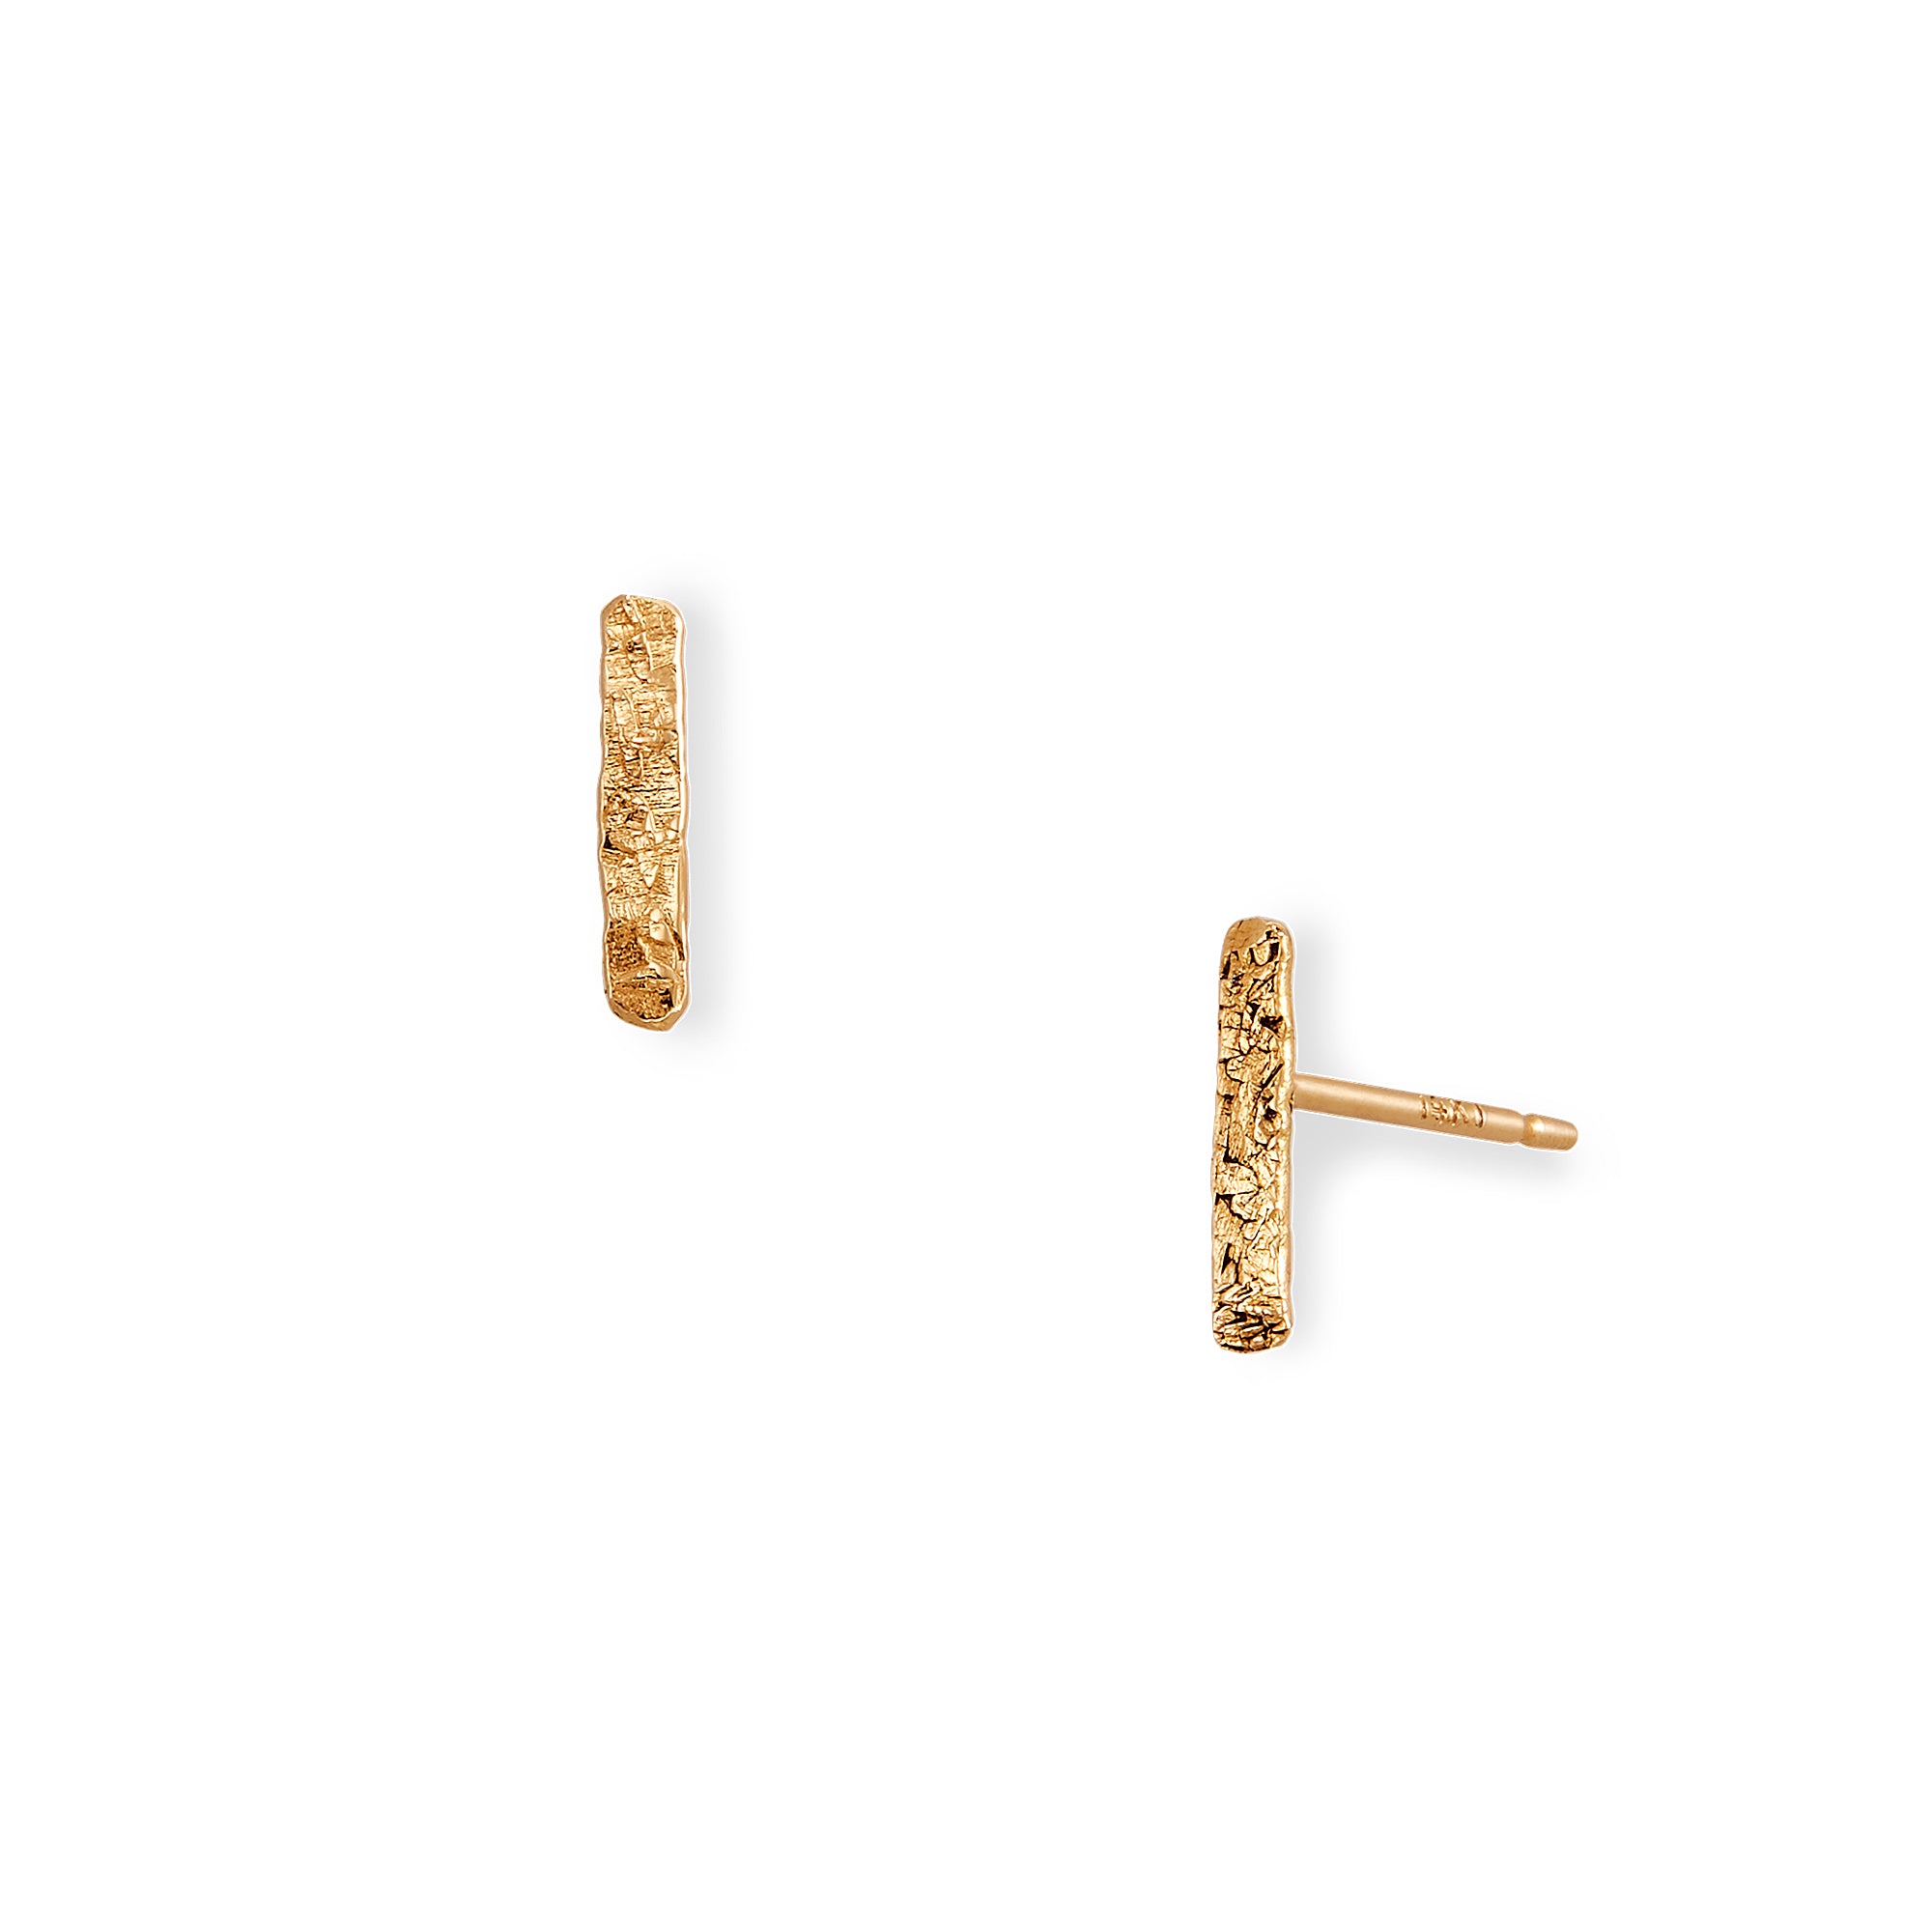 The Dash Stud, modern simplicity in 14k gold with your choice of classic hammered textured or nugget texture